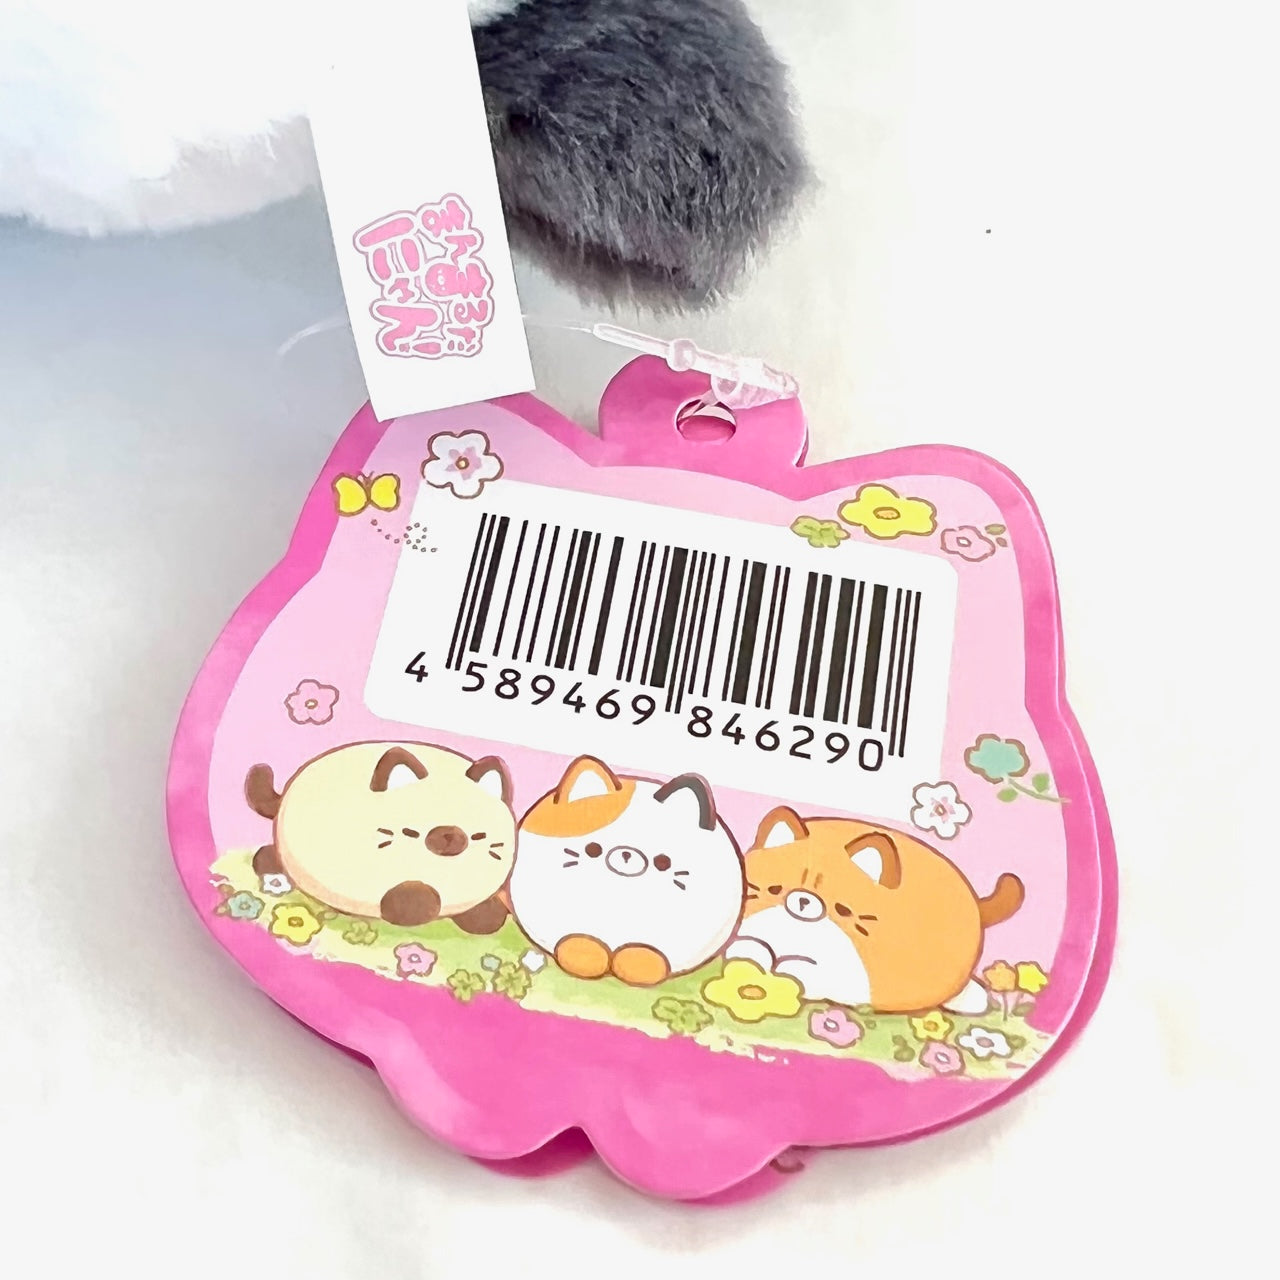 X 63350 ROUND CATS PLUSH-DISCONTINUED